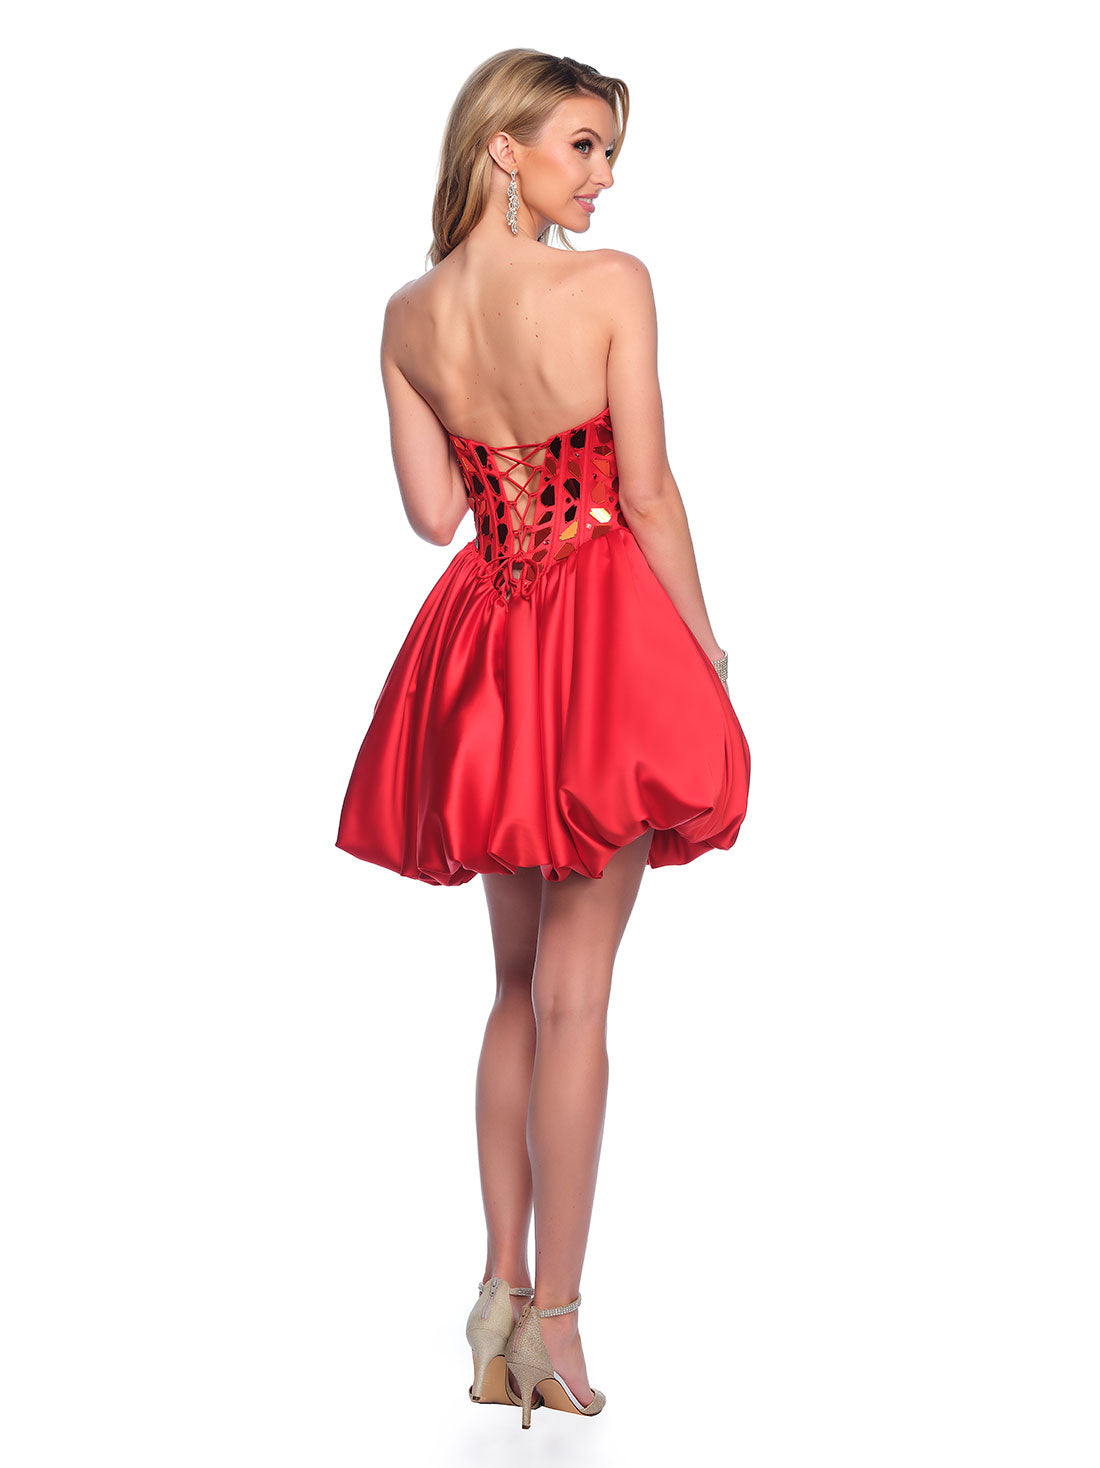 STRAPLESS MIRRORED CORSET DRESS WITH DETACHABLE SLEEVES